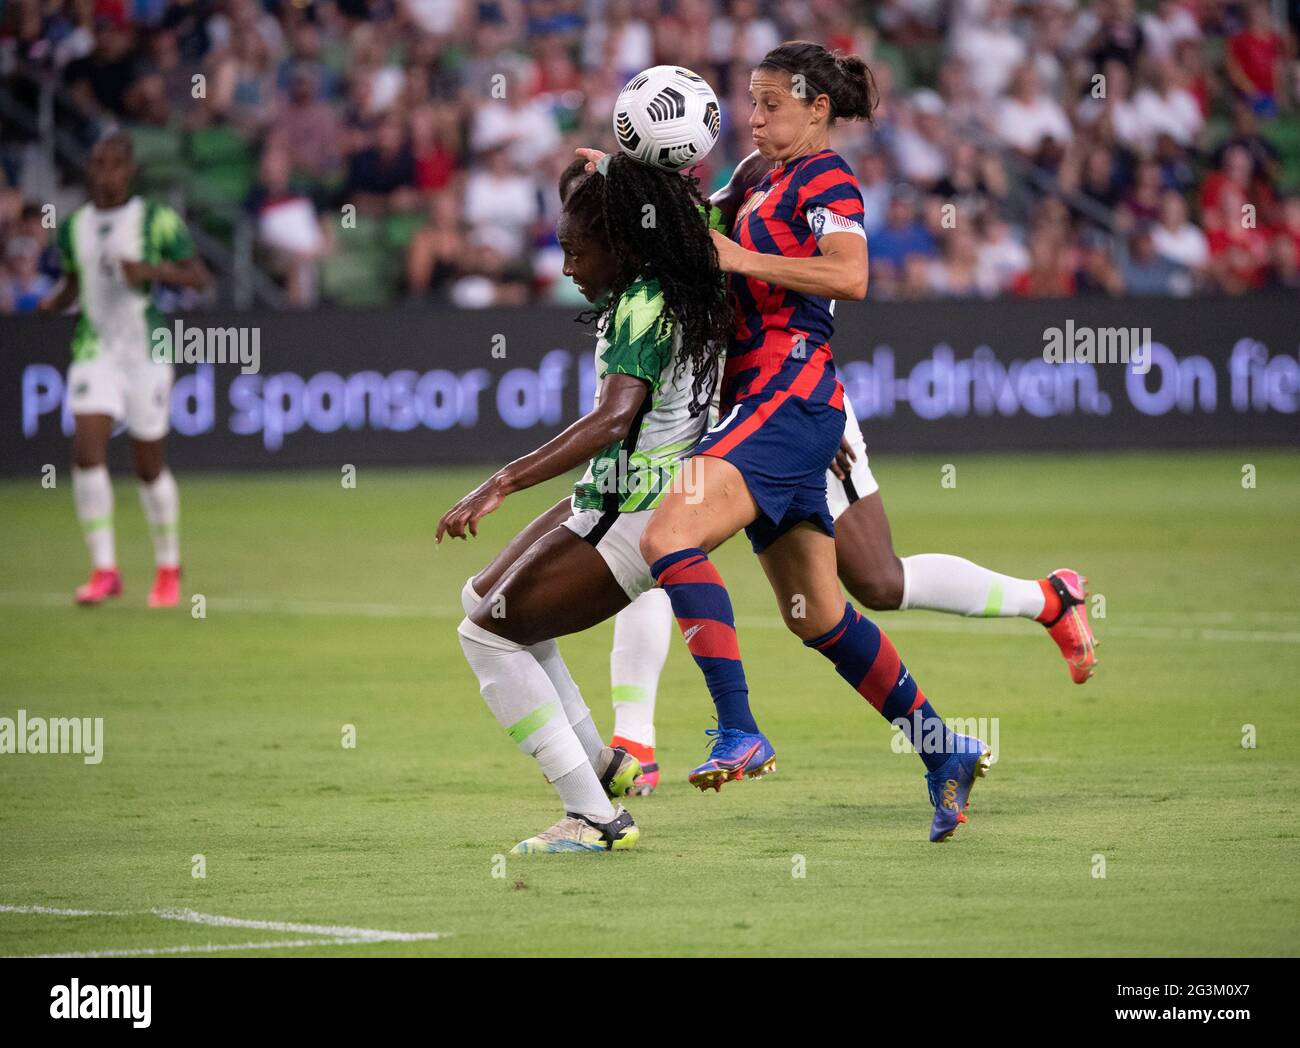 Austin, Texas, USA, June 16 2021: USA forward CARLI LLOYD (10) takes on Nigeria's MICHELLE ALOZI (22) during the second half of the US Women's National Team (USWNT) 2-0 victory over Nigeria, in the first match at Austin's Q2 Stadium. The U.S. women's team, an Olympic favorite, is wrapping up a series of summer matches to prep for the Tokyo Games. Press scored a goal in the win for USA Soccer. Credit: Bob Daemmrich/Alamy Live News Stock Photo